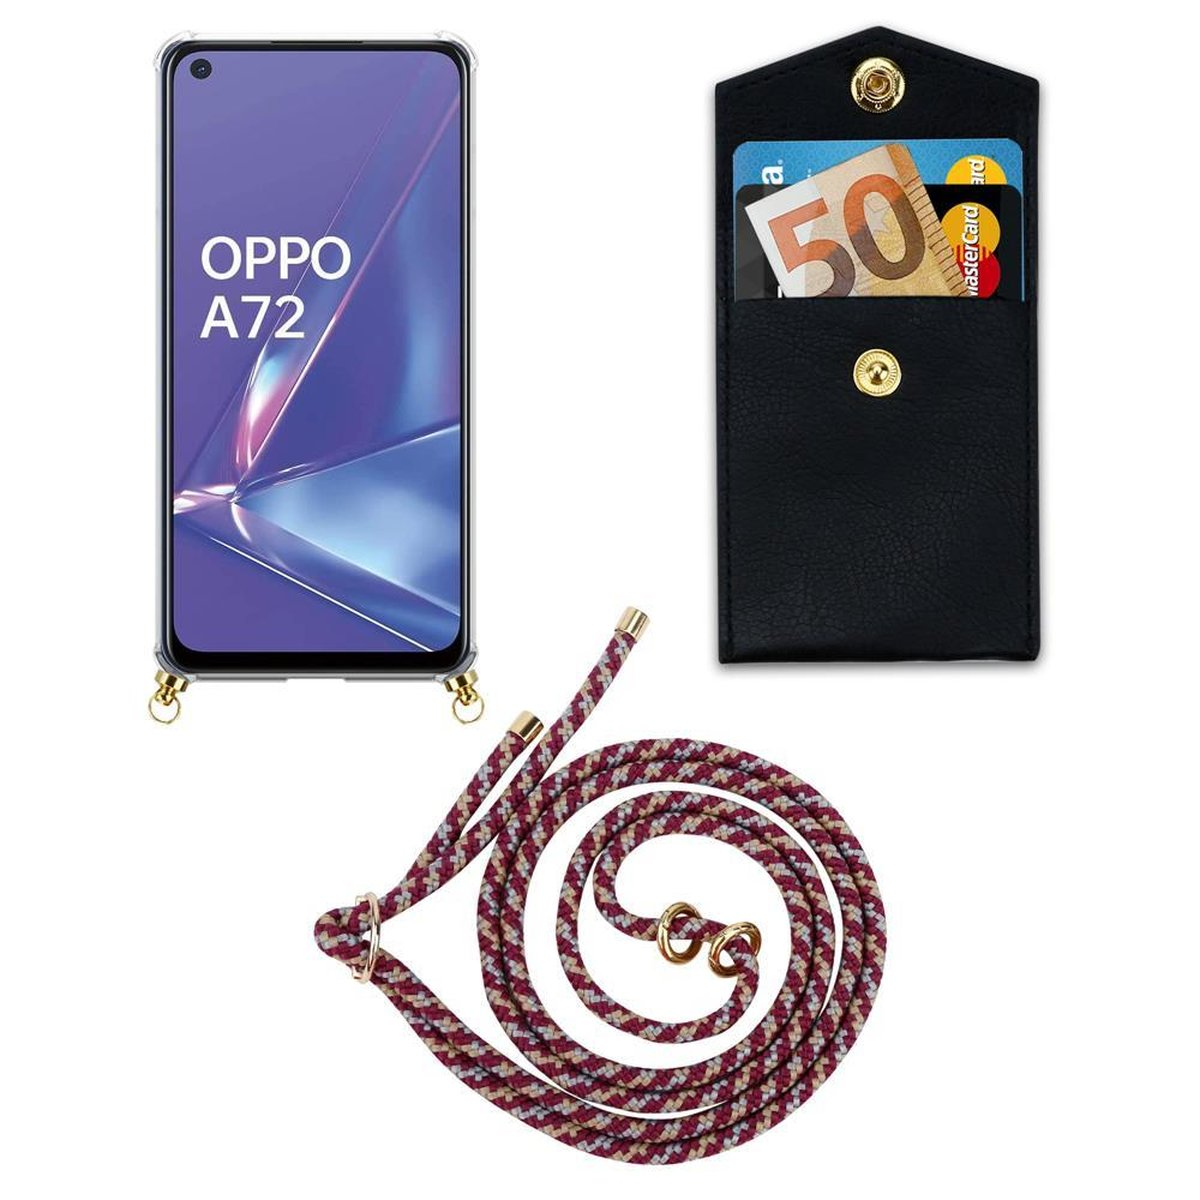 GELB Gold Ringen, und Hülle, Backcover, ROT Kette abnehmbarer mit Kordel Handy CADORABO Band Oppo, A92, WEIß